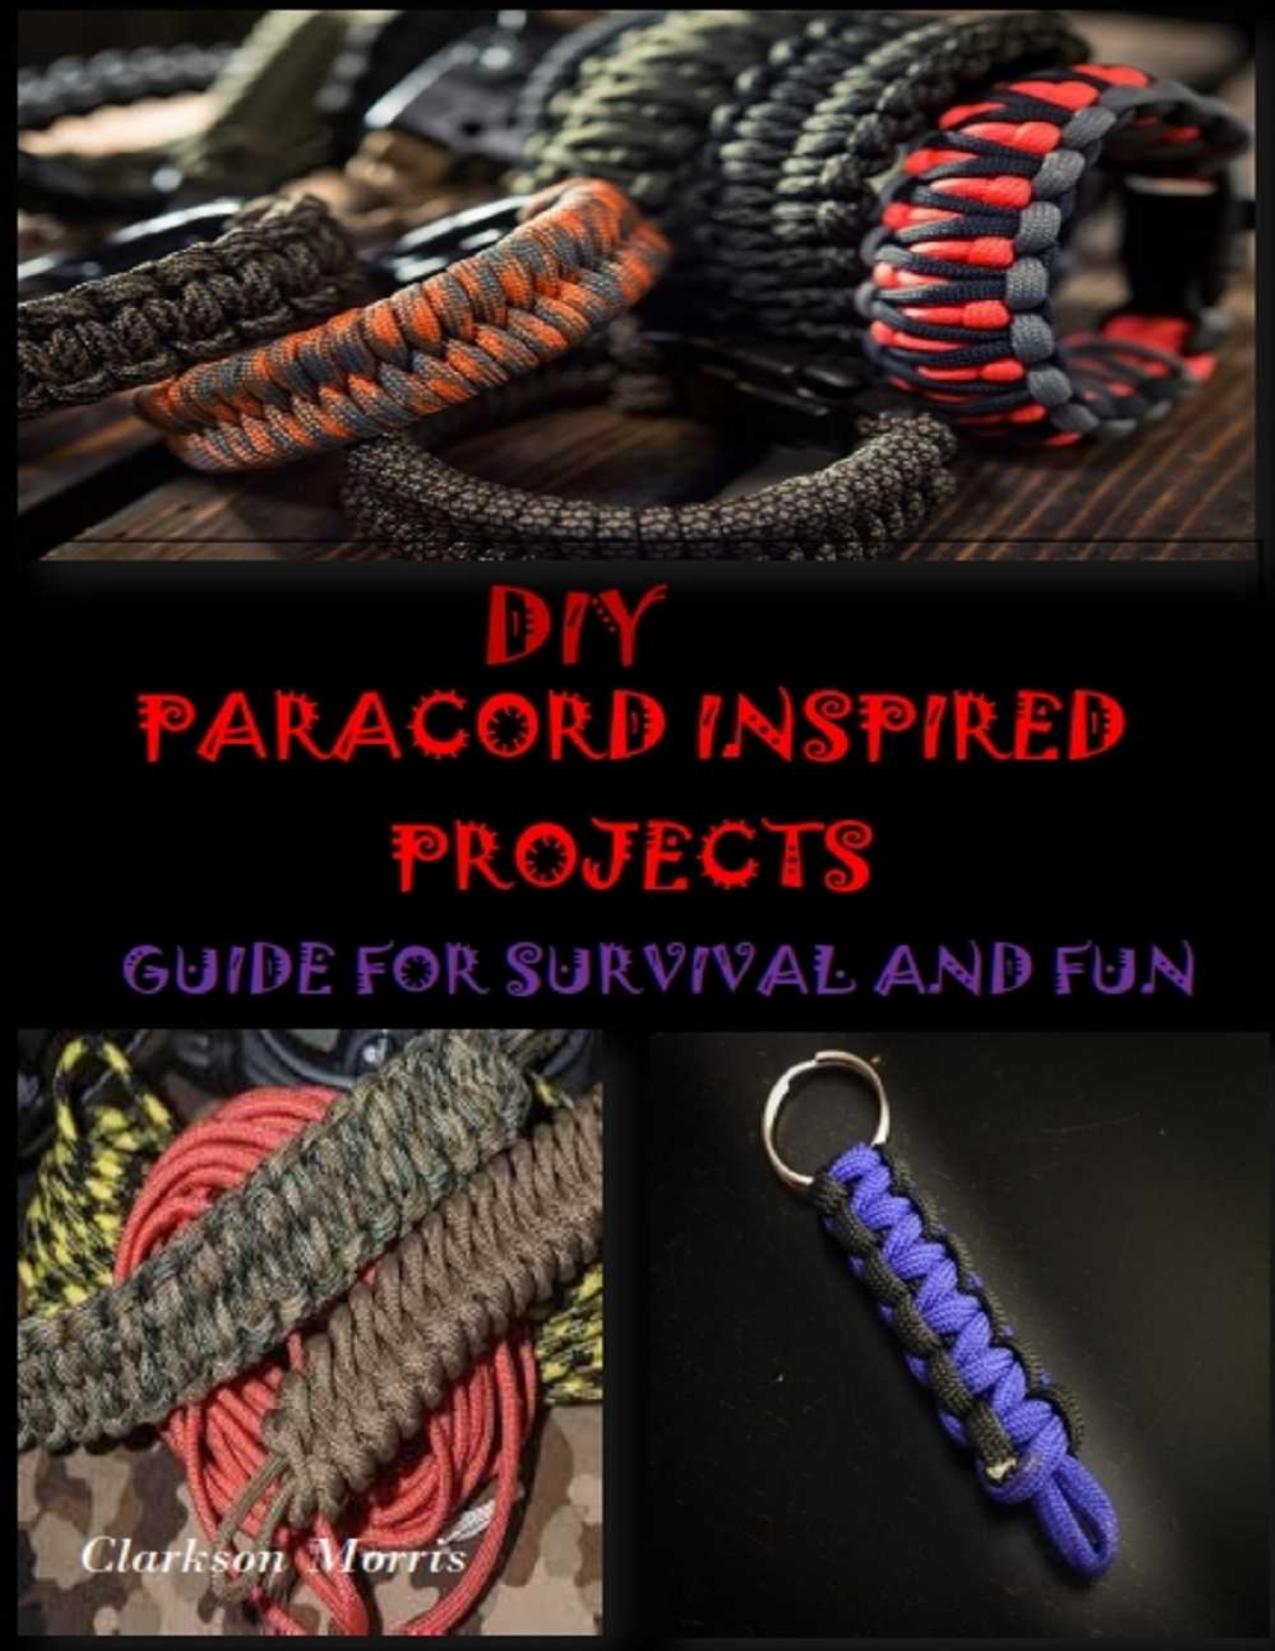 DIY PARACORD INSPIRED PROJECTS: GUIDE FOR SURVIVAL AND FUN by Clarkson Morris